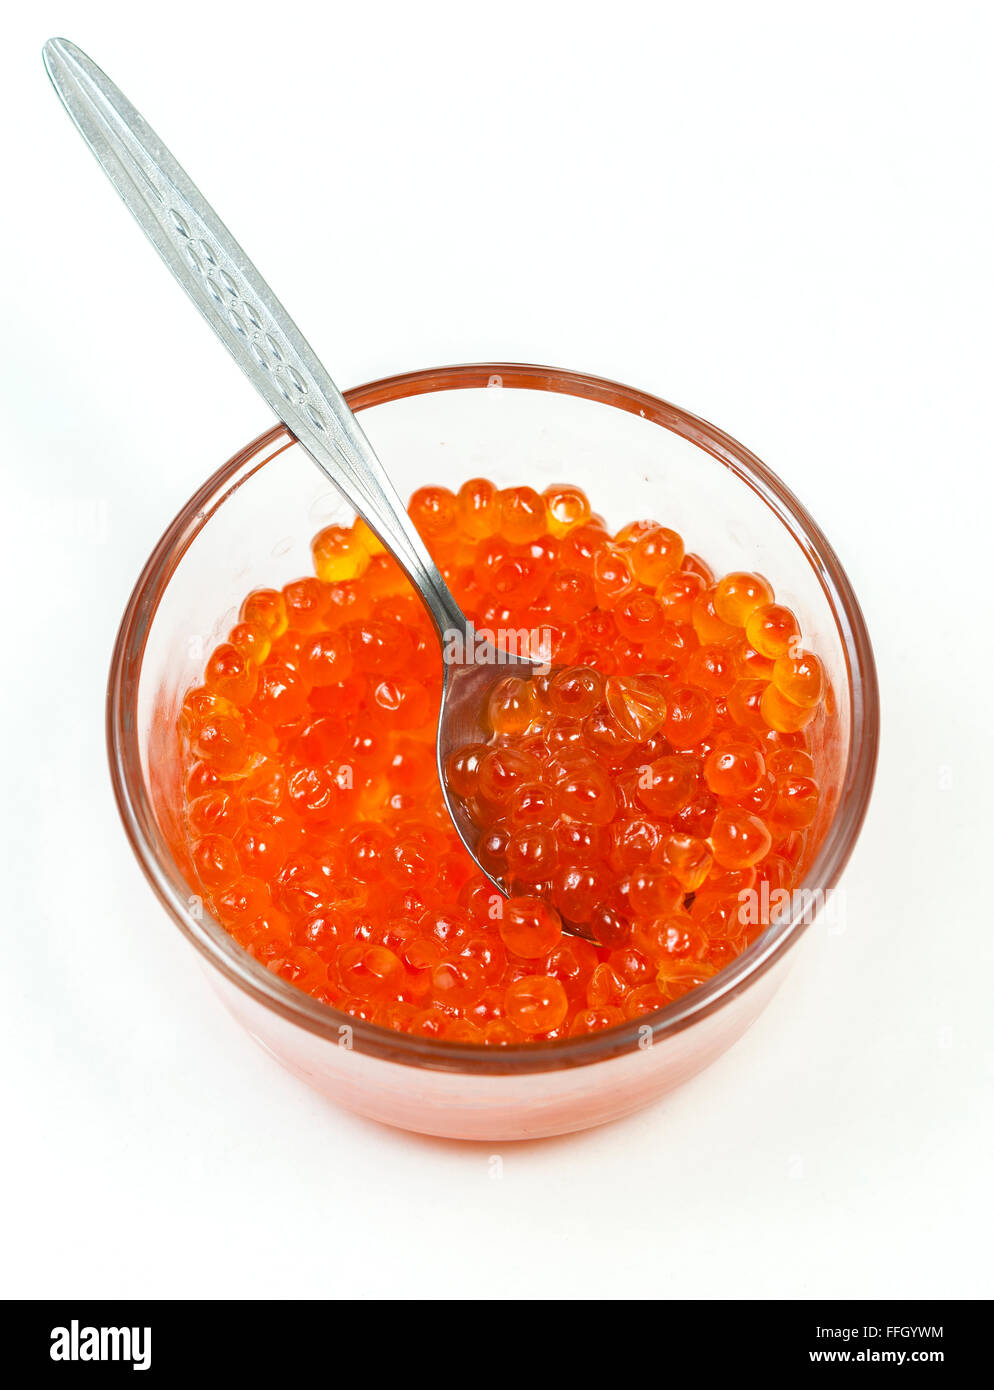 Salmon roe in a glass bowl Stock Photo